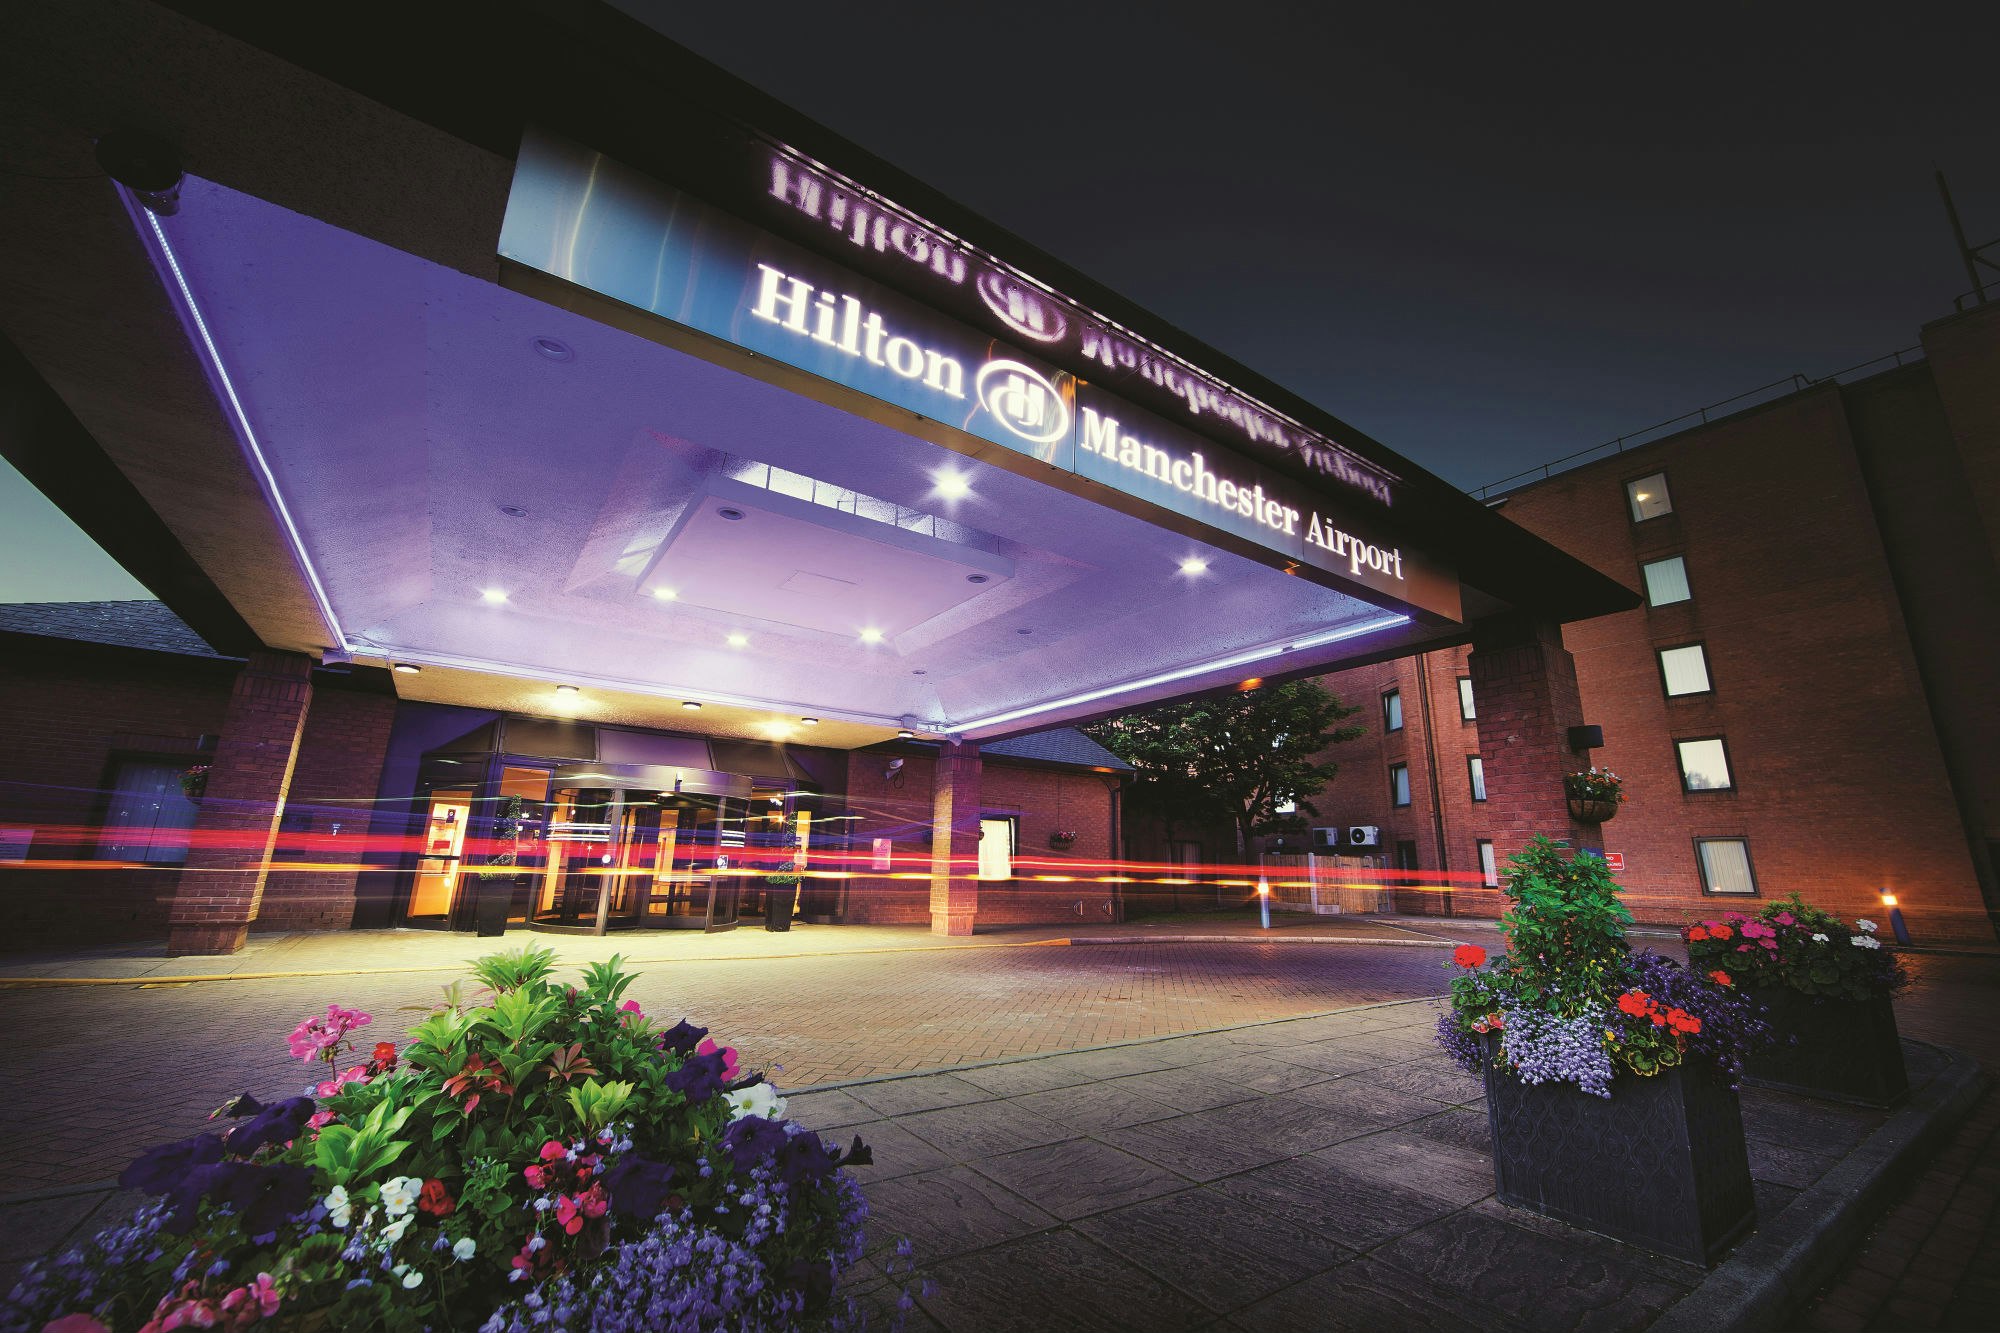 Hilton, Manchester Airport - Hanover Suite image 2